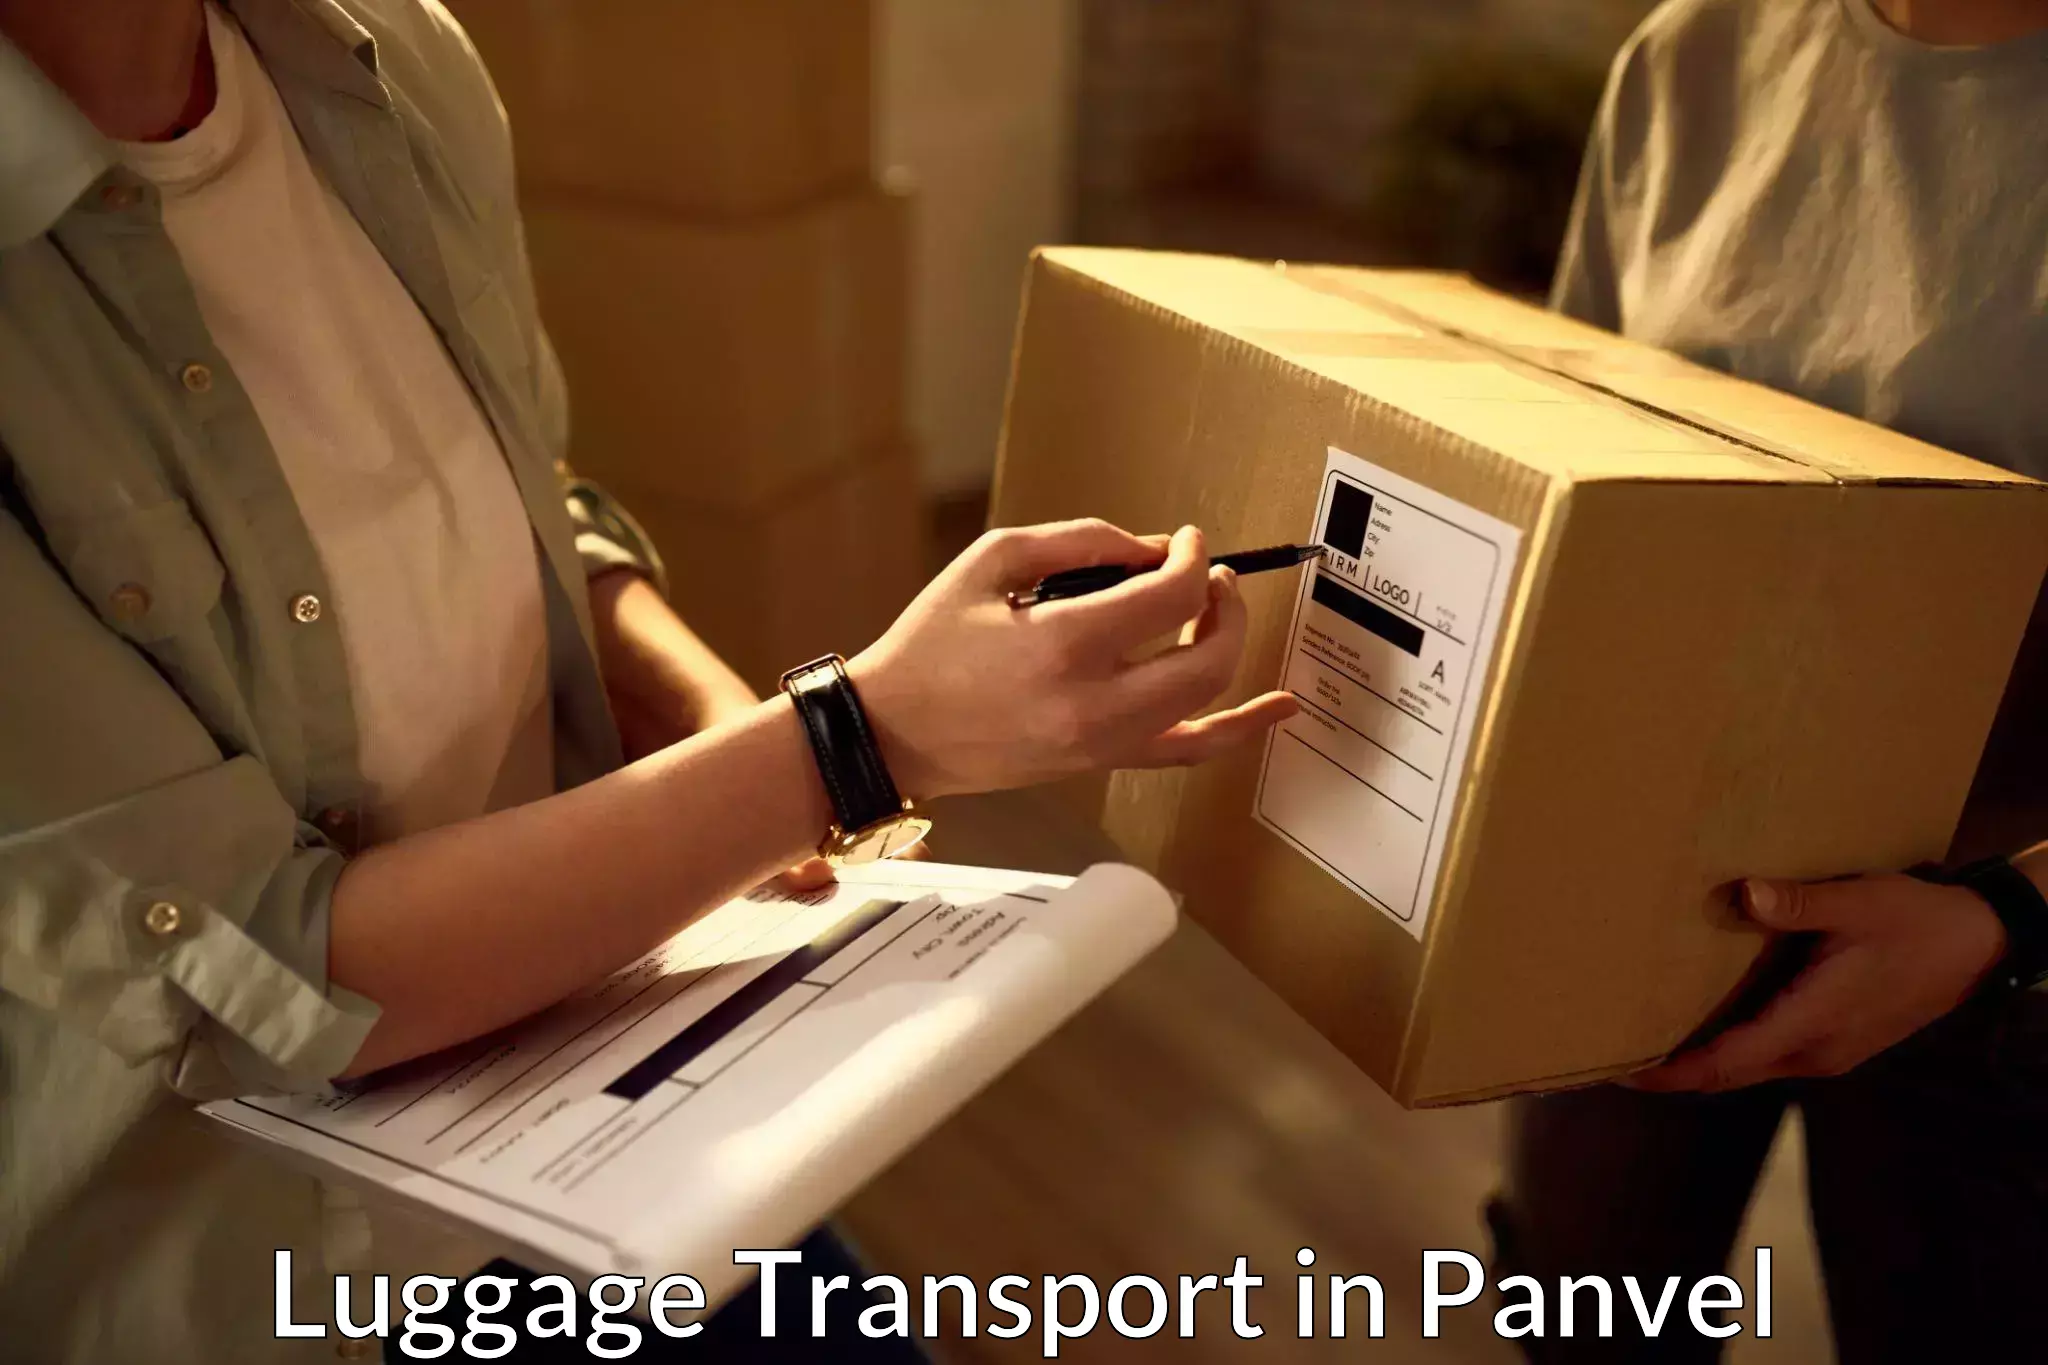 Doorstep luggage collection in Panvel